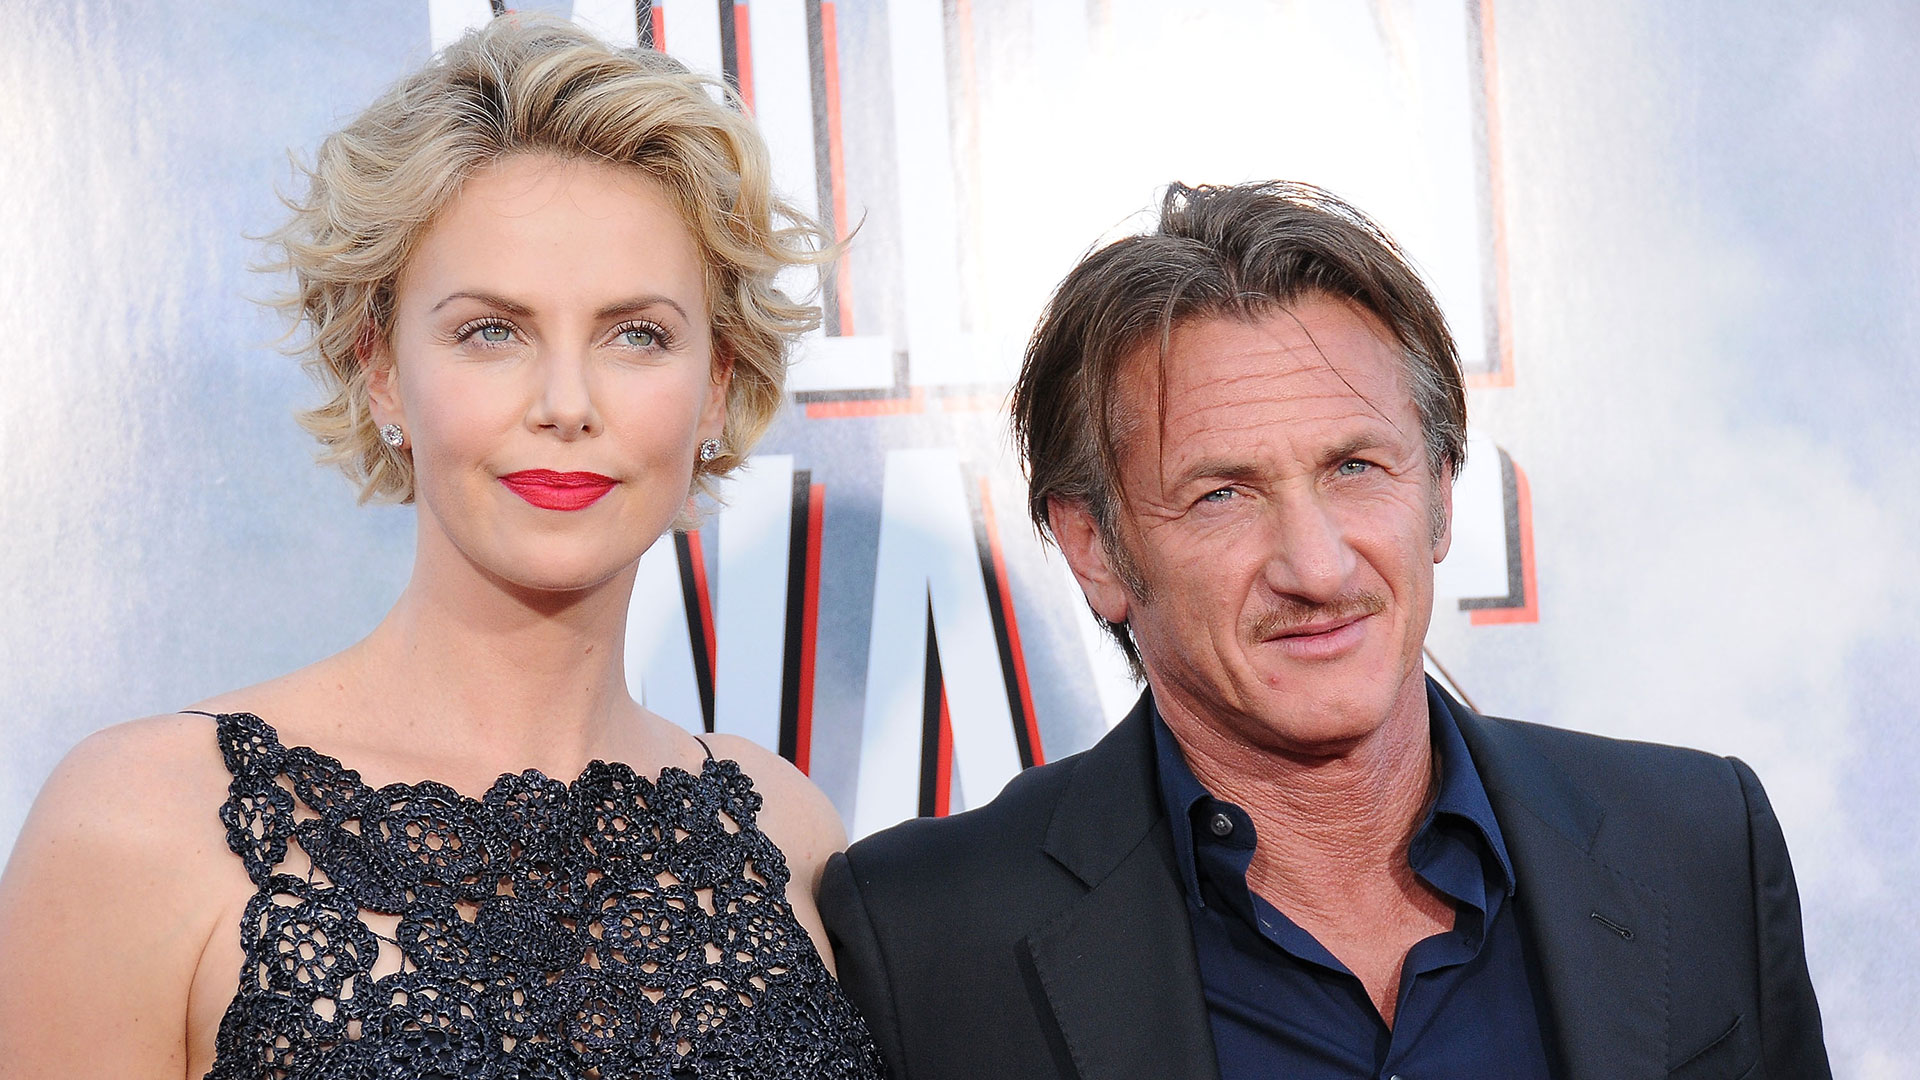 He loved her, she not so much: the story of passion and heartbreak of Sean Penn and Charlize Theron